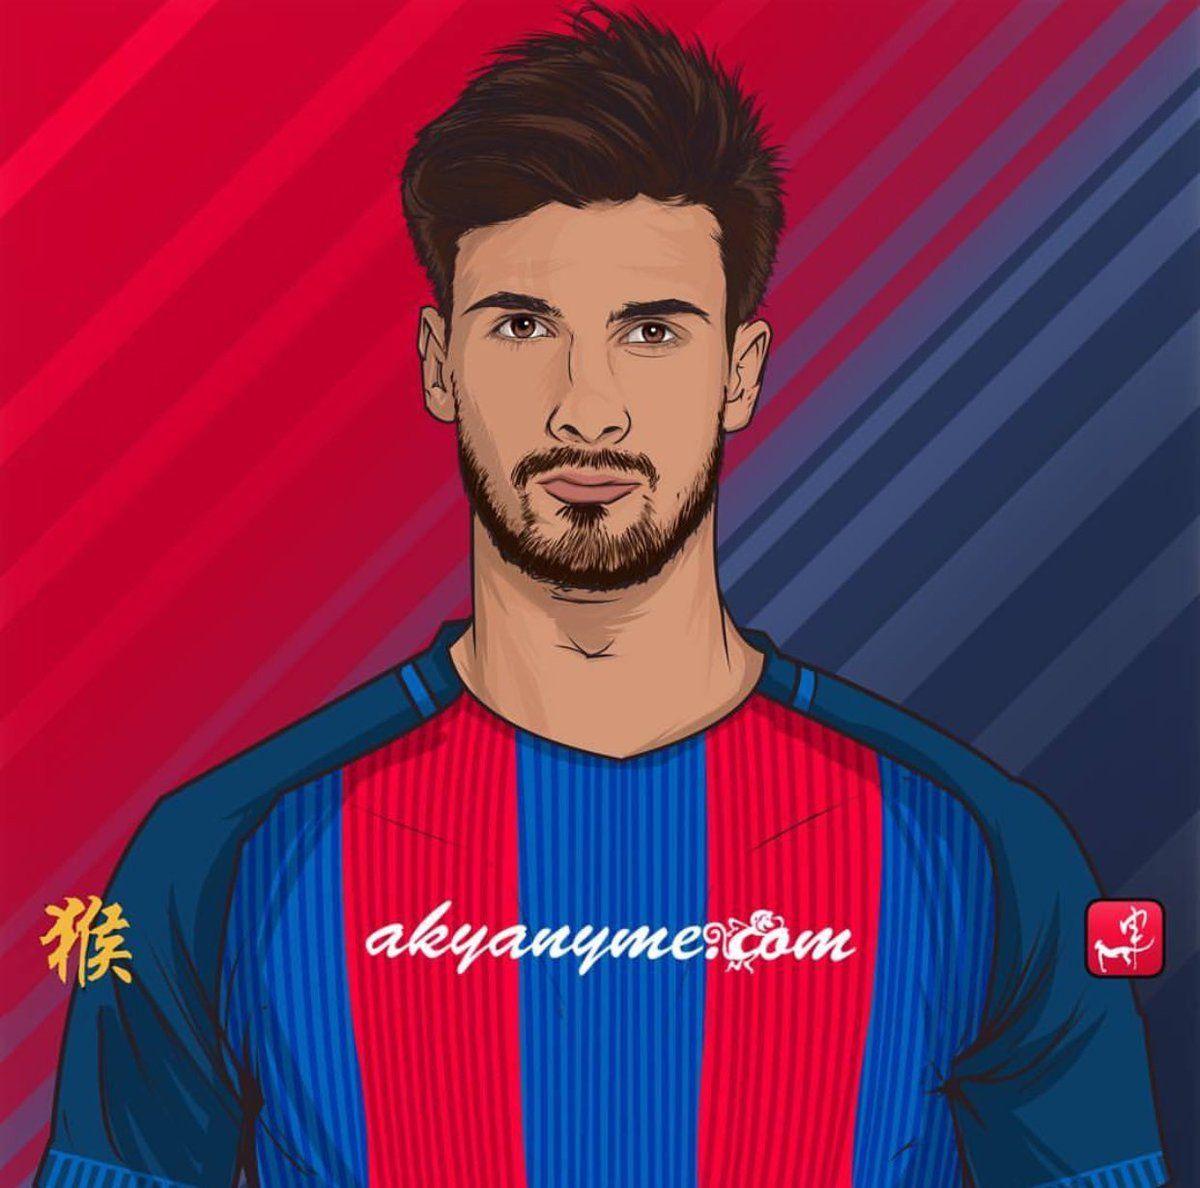 Papers Of Barça: Andre Gomes as a Barça